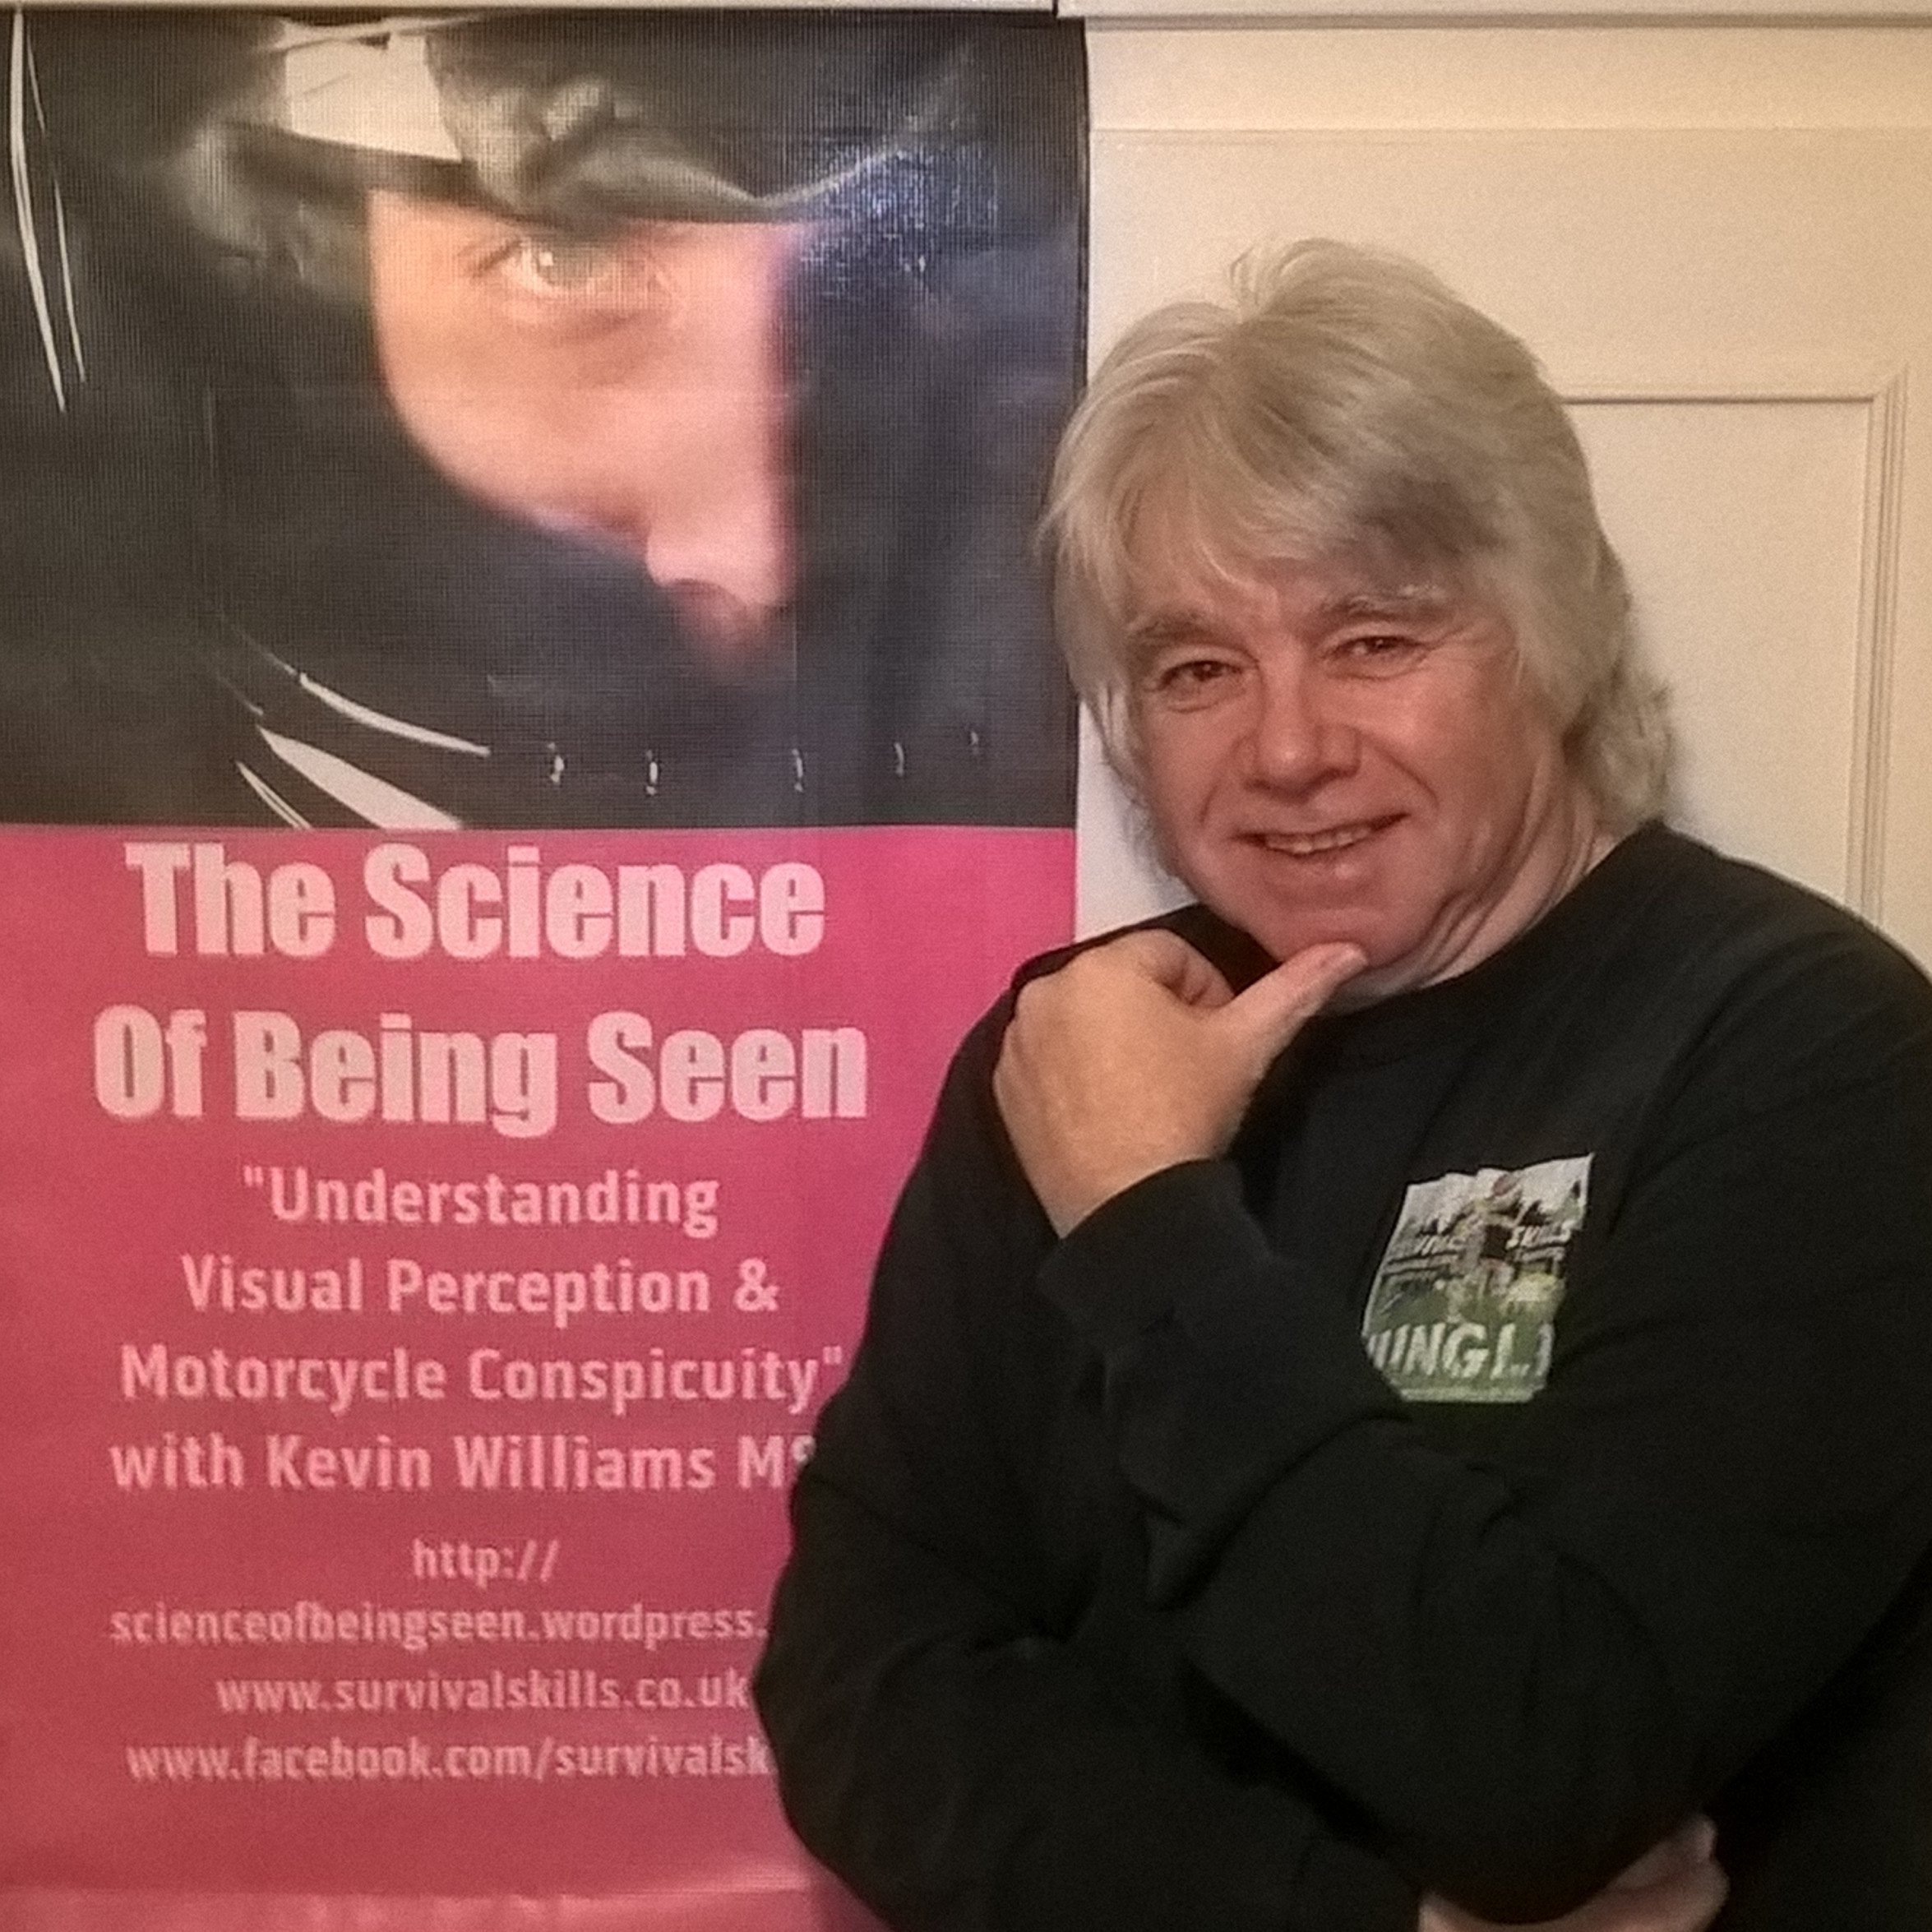 Motorcyclist, rider, biker... writer, author, riding coach, rider safety advocate... creator of 'Science Of Being Seen'
FB: https://t.co/G7Fj2aaEVI